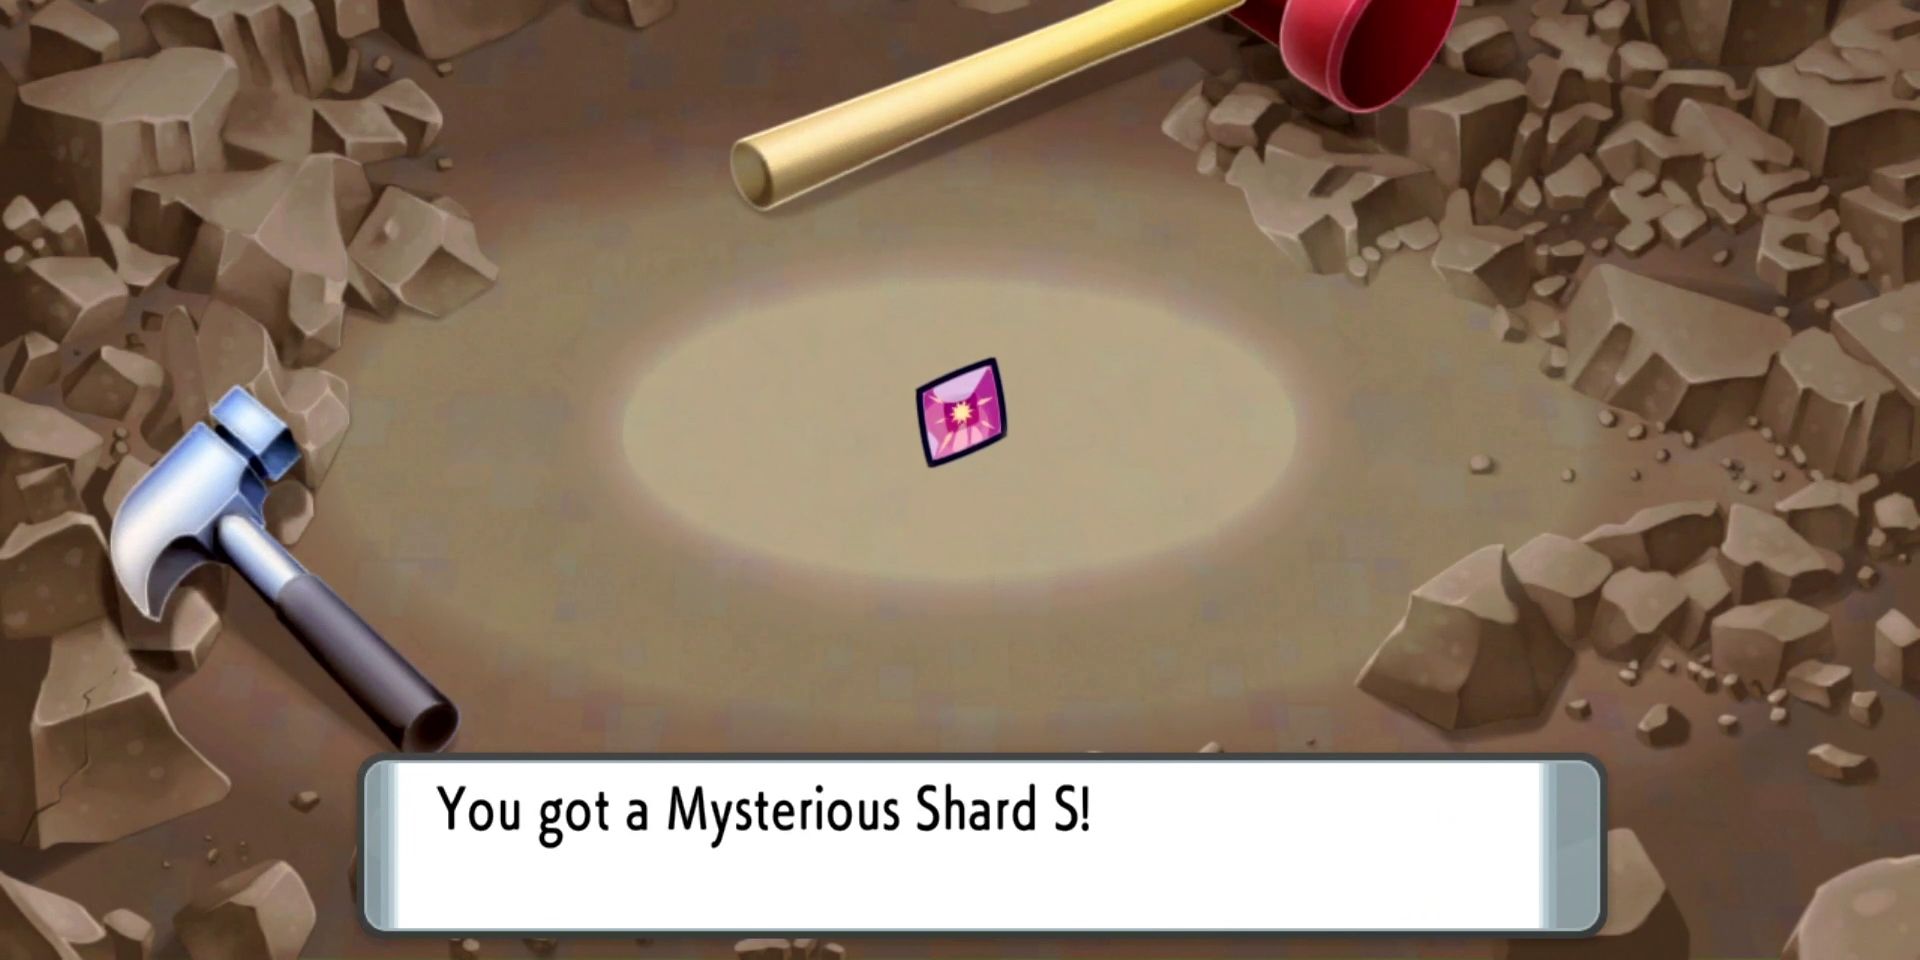 pokemon-brilliant-diamond-shining-pearl-how-to-find-mysterious-shards-guide-05-mysterious-shard-s